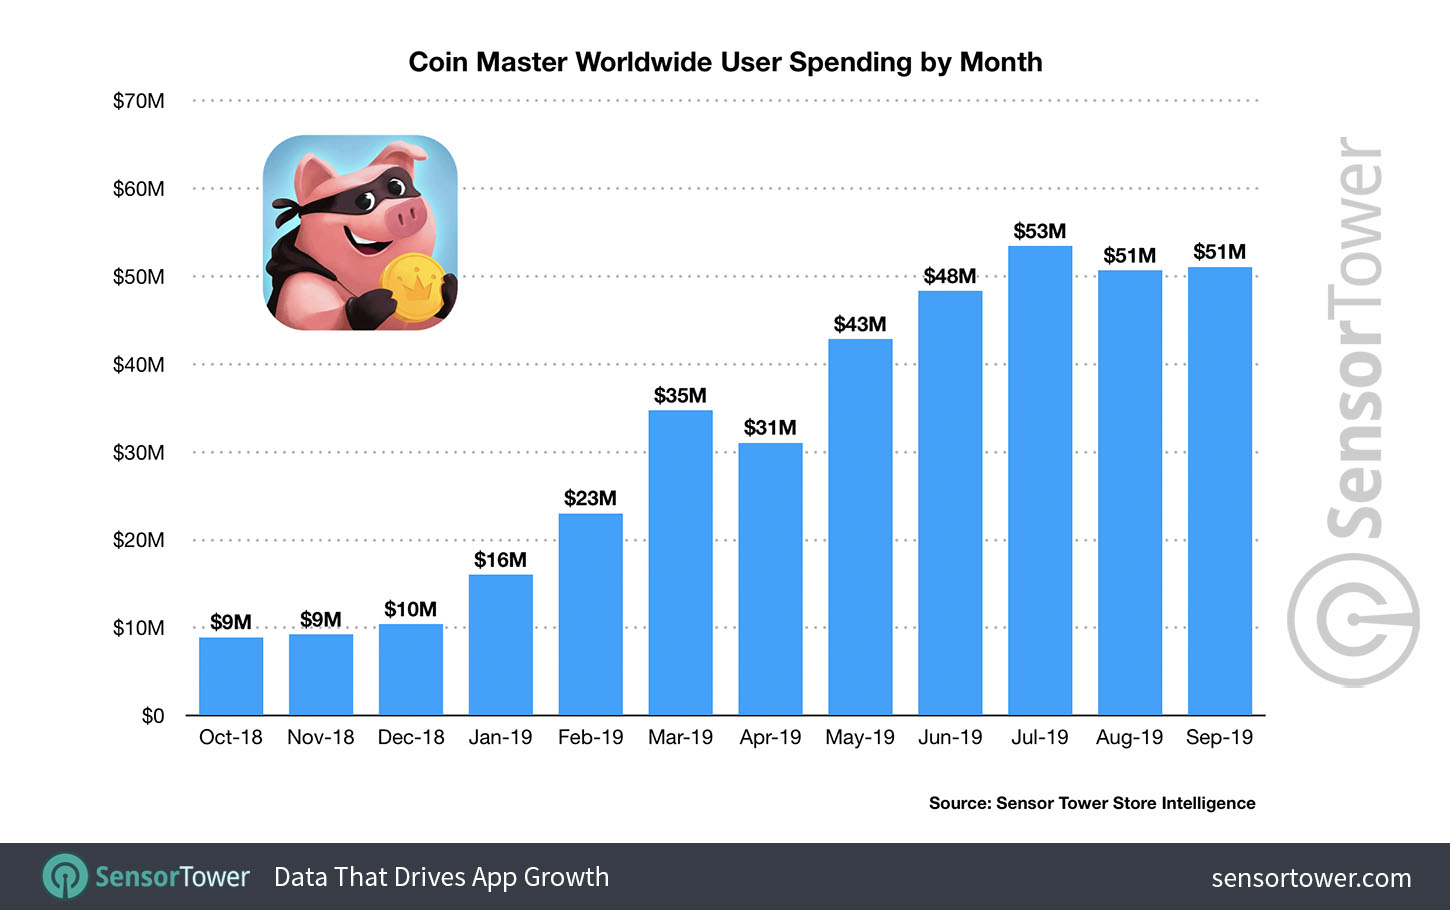 Coin Master global gross revenue month by month from October 2018 to September 2019